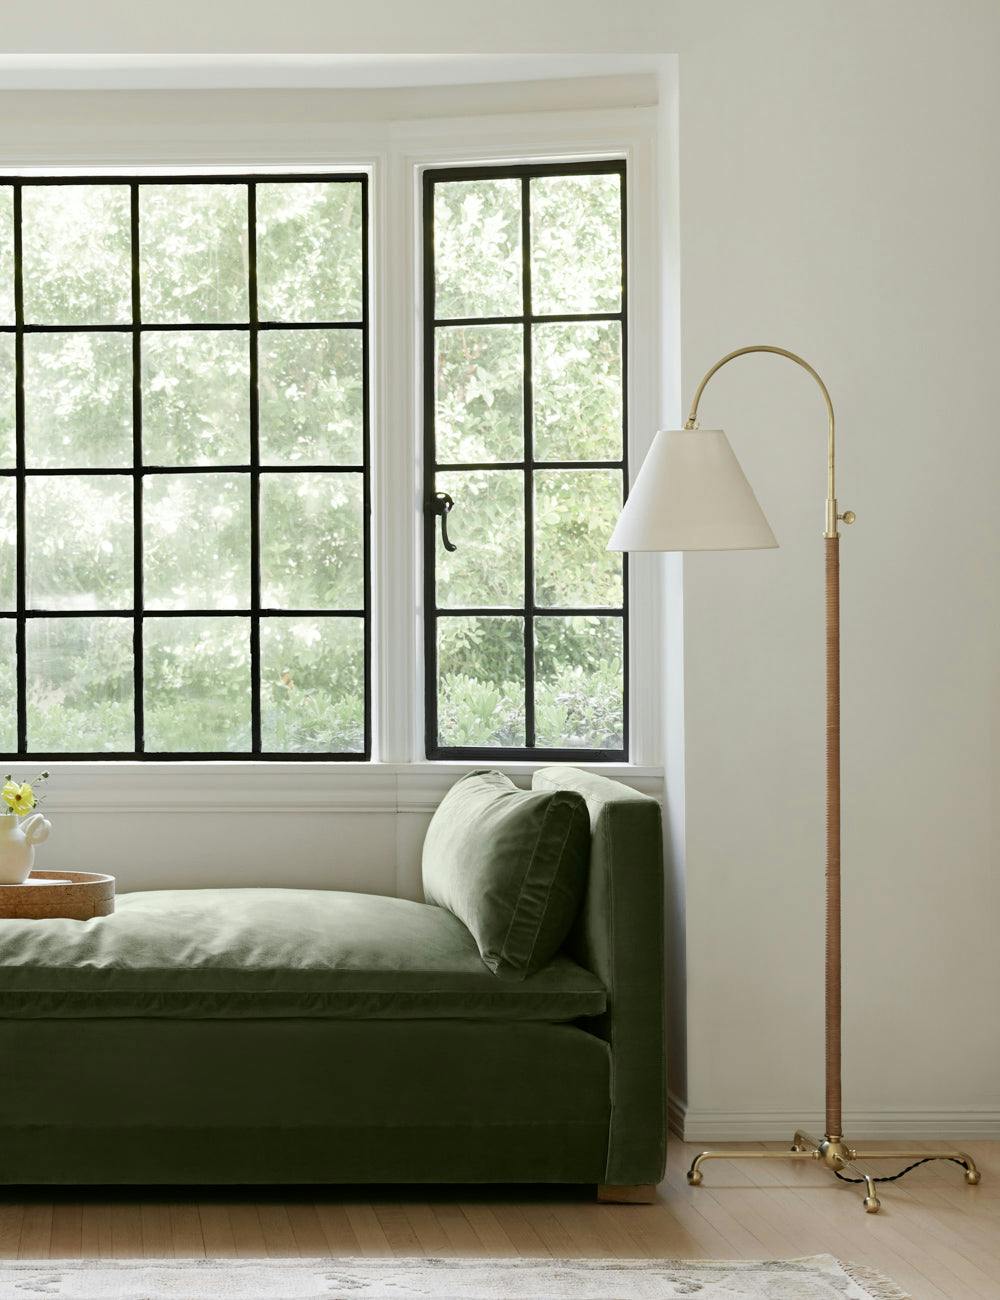 Curves No.1 Aged Brass Arc Floor Lamp with Off-White Linen Shade